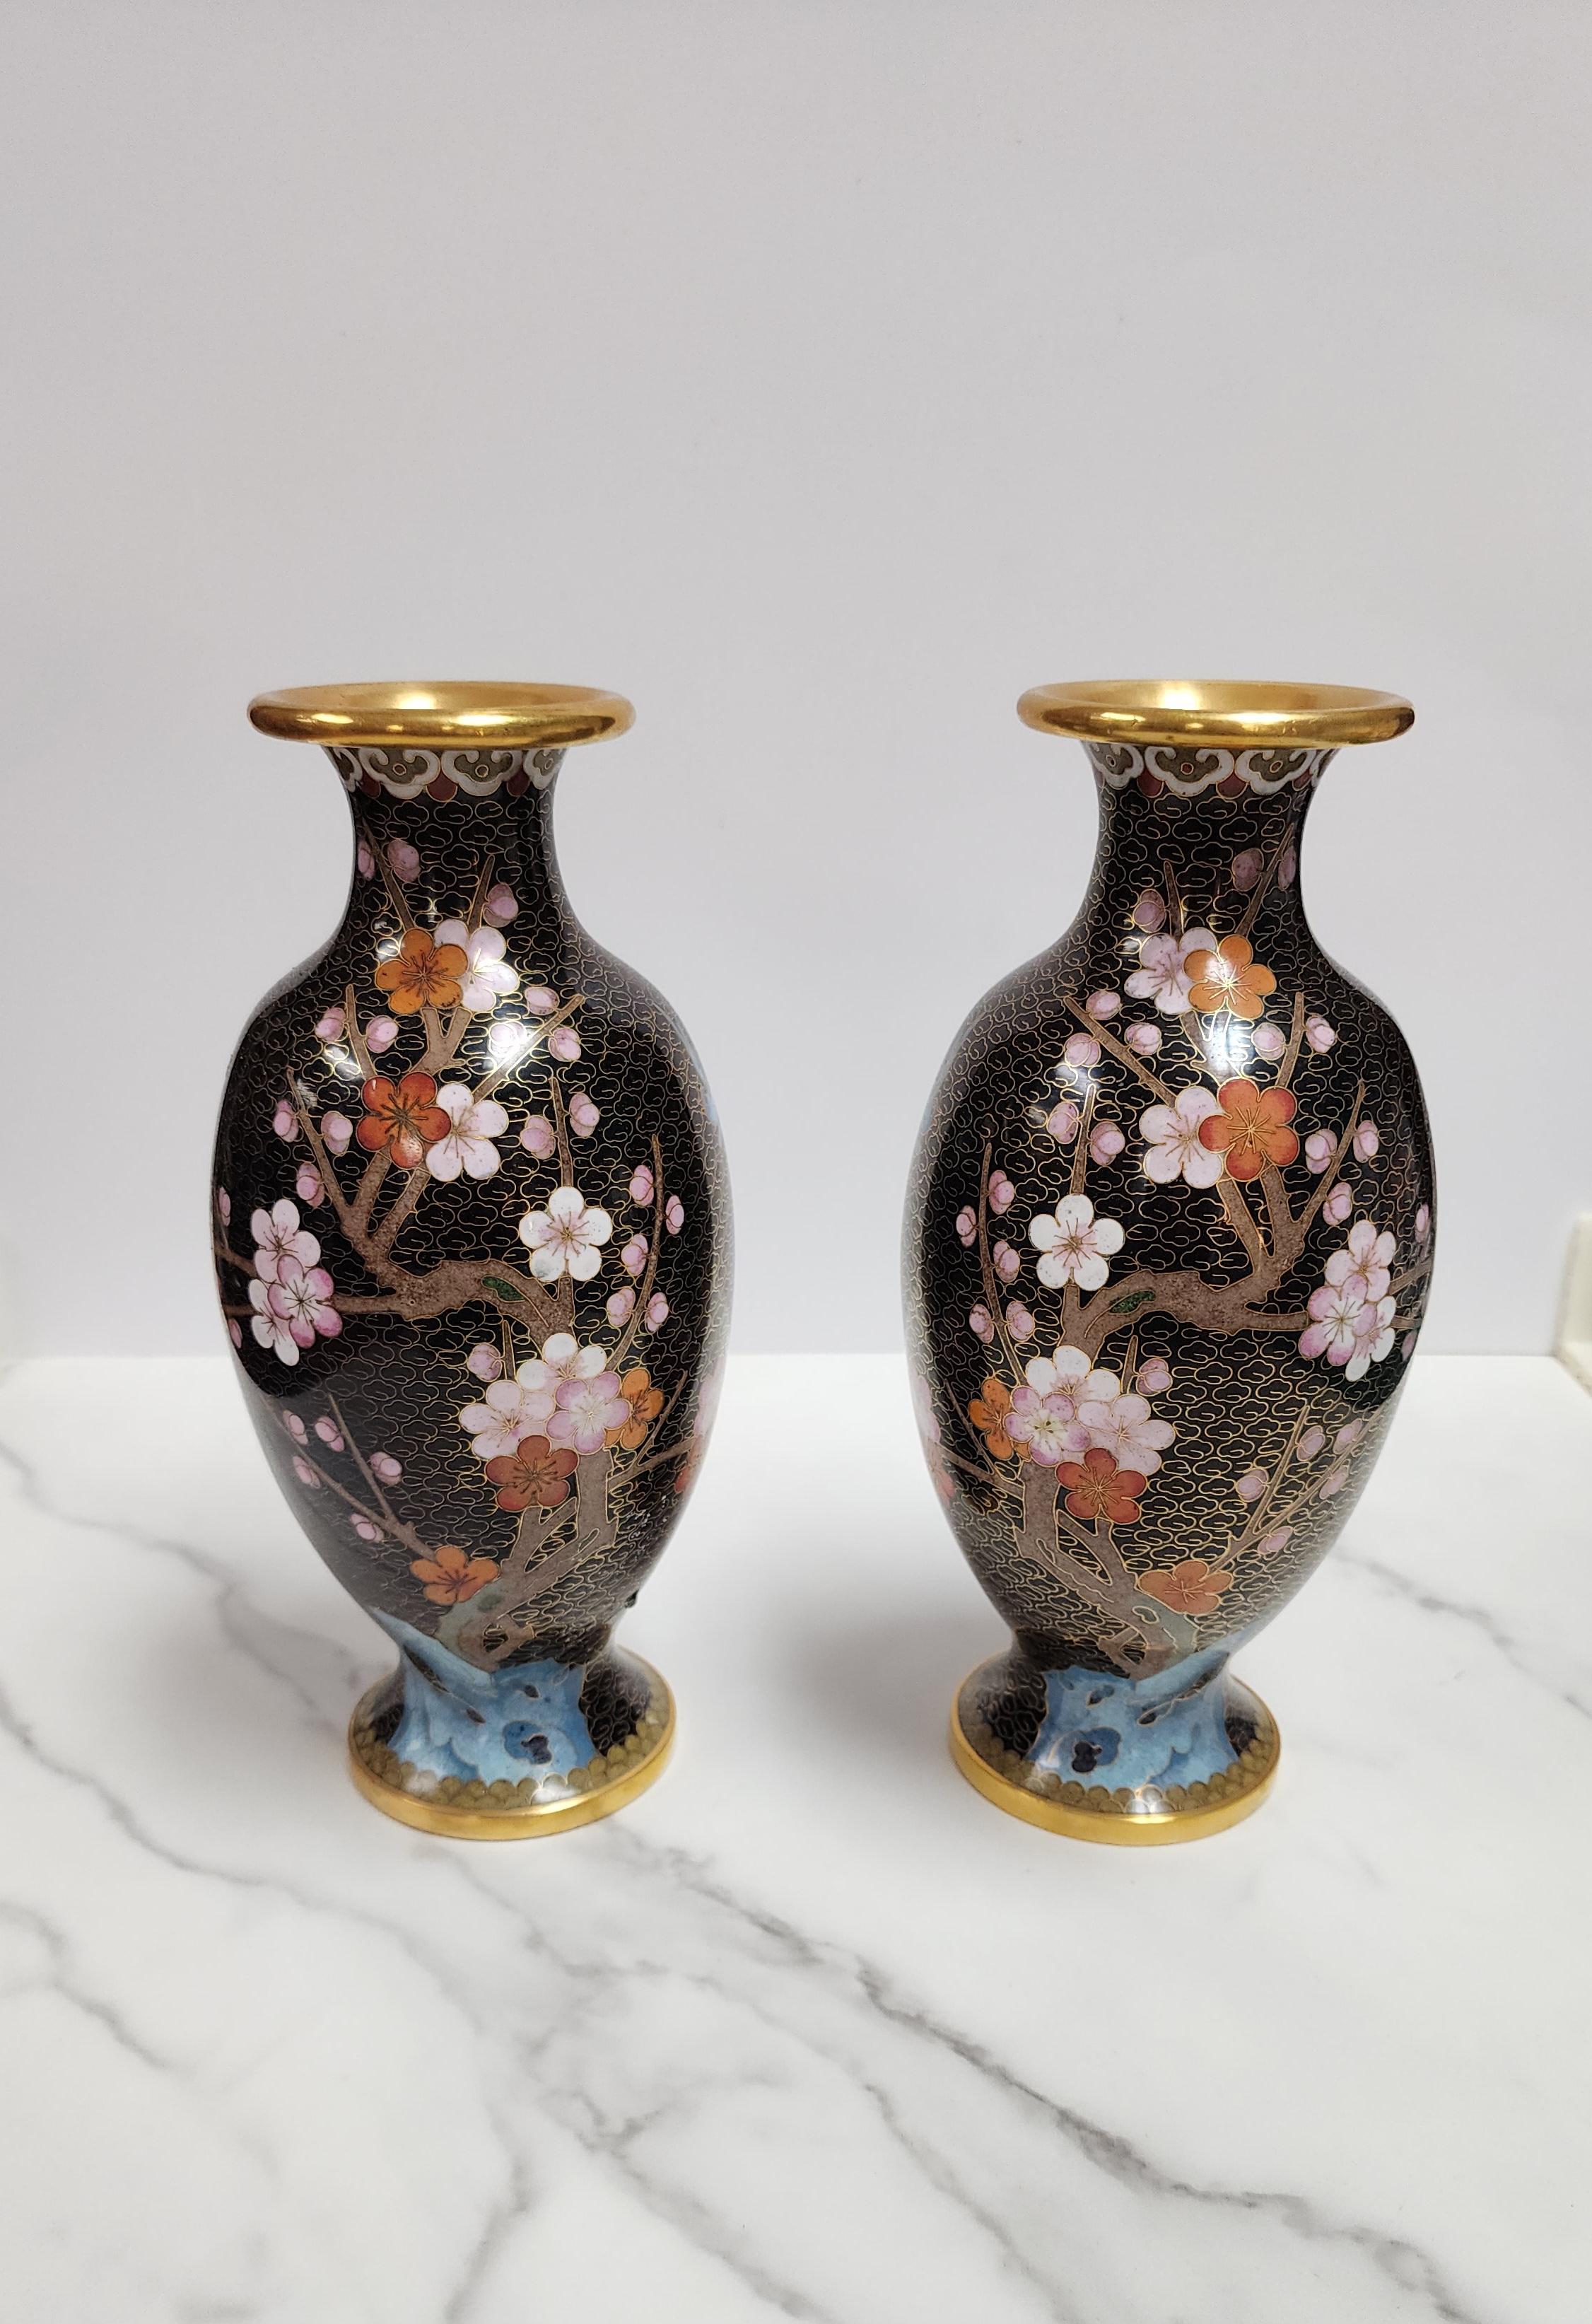 Pair of Mirrored Chinese Cloisonne Enamel Vase with Flower and Bird Motif In Good Condition For Sale In Frederick, MD